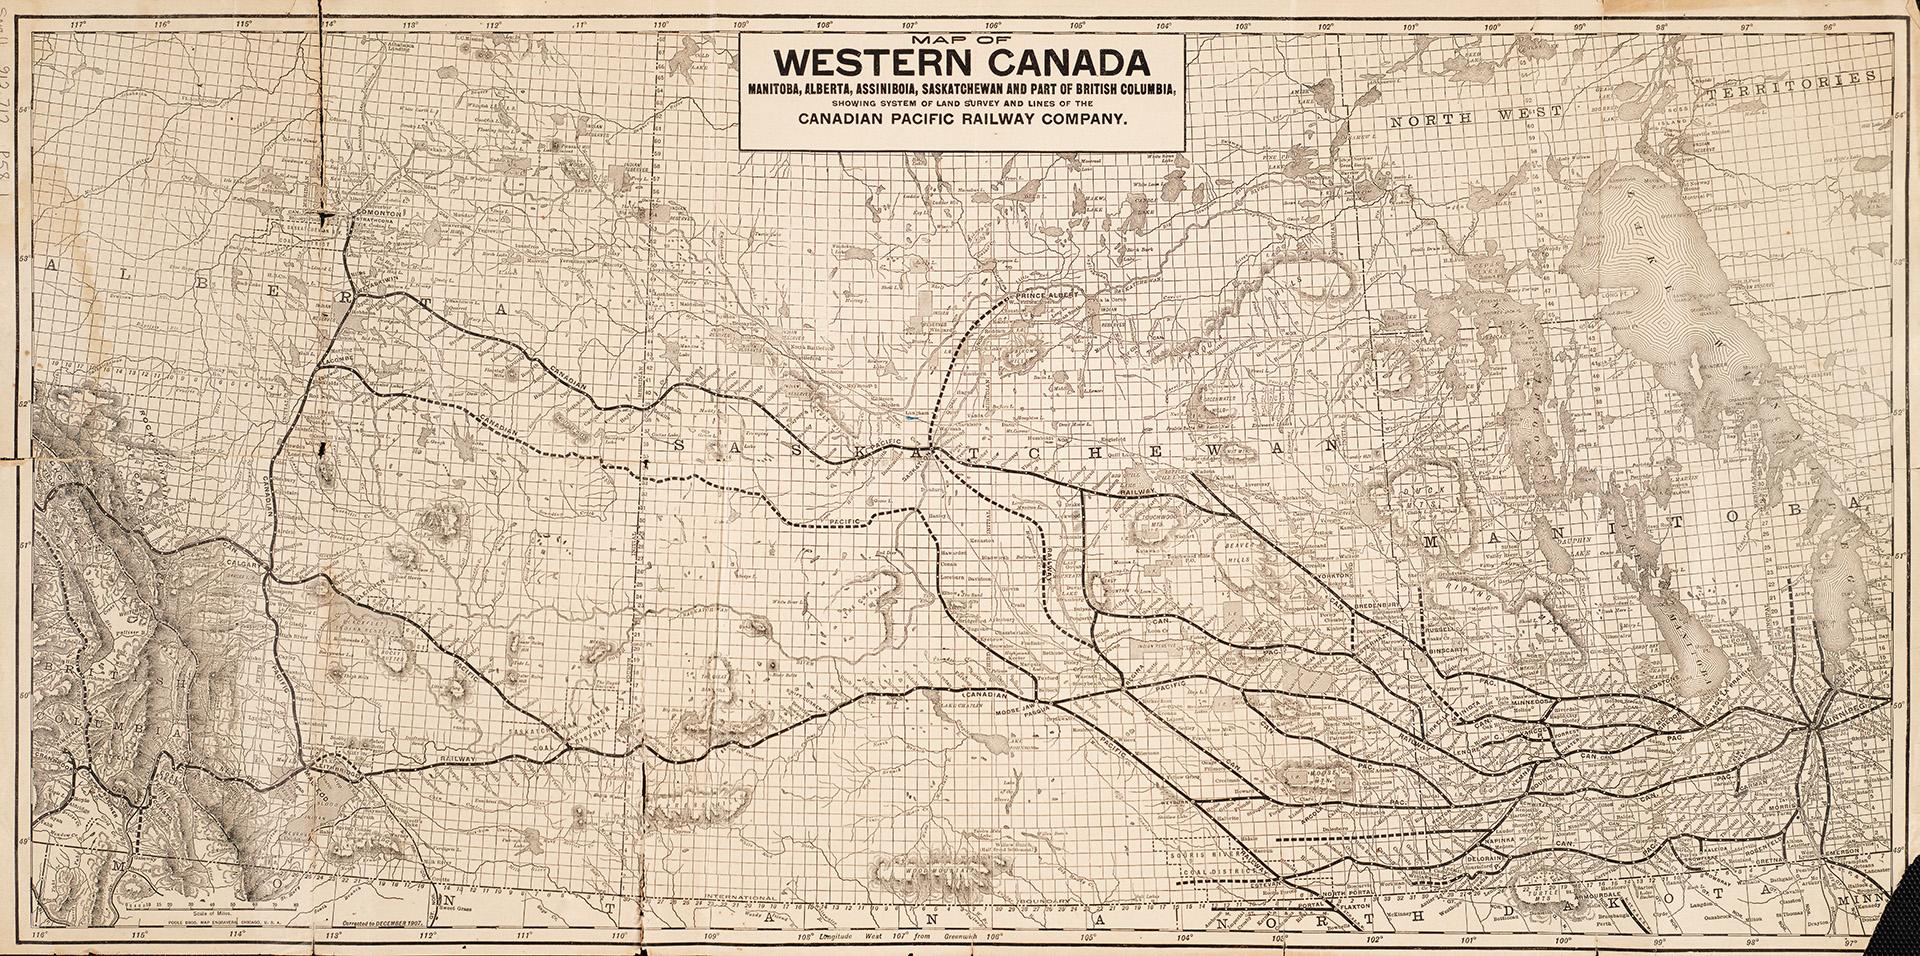 Map of Western Canada Manitoba, Alberta, Assiniboia, Saskatchewan and other parts of British Columbia, showing system of land survey and lines of the Canadian Pacific Railway Company